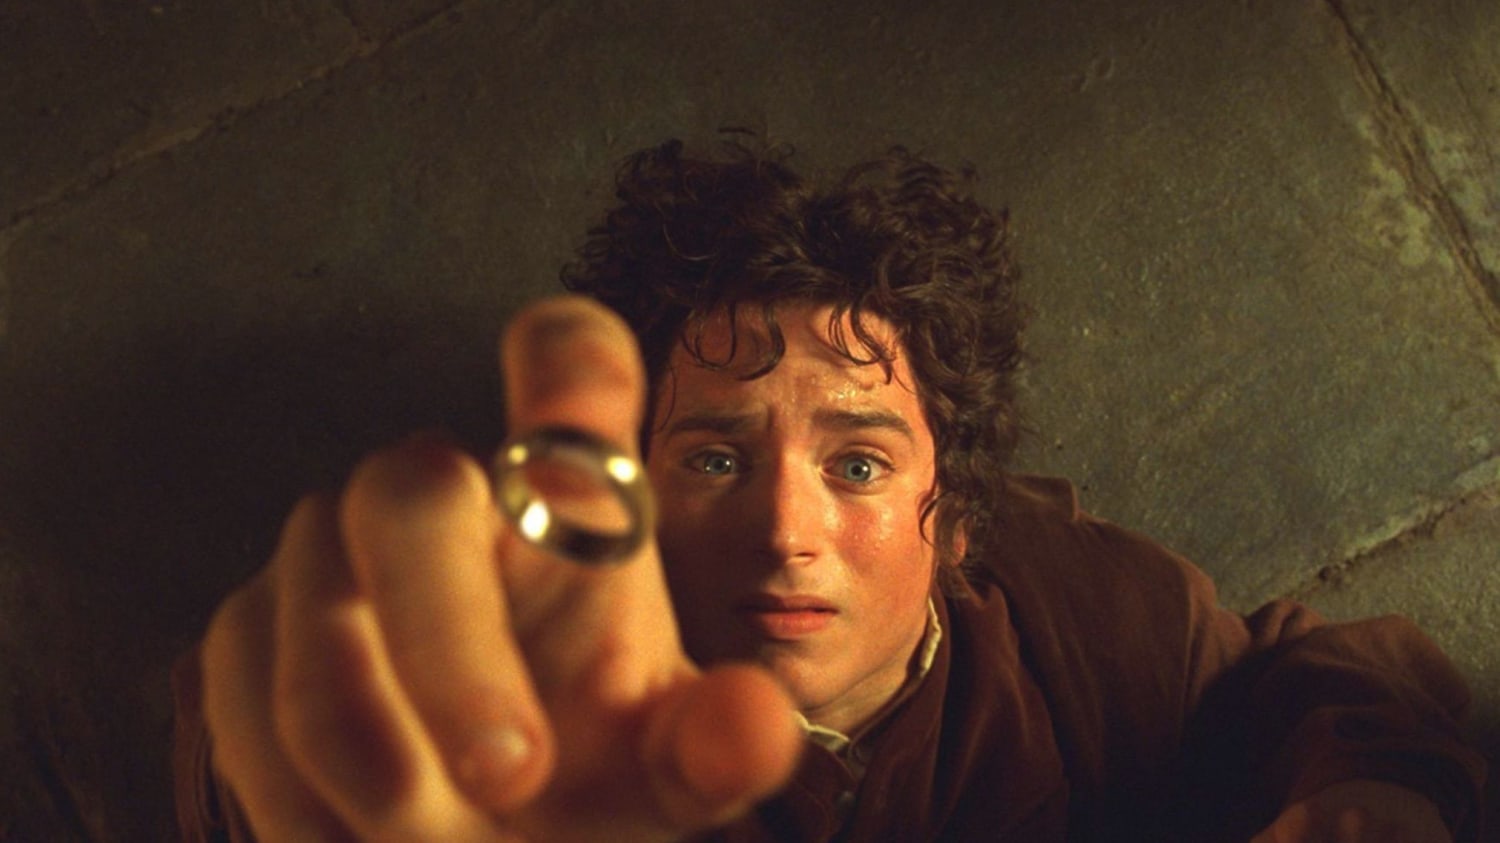 20 Epic Facts About The Lord of the Rings Trilogy